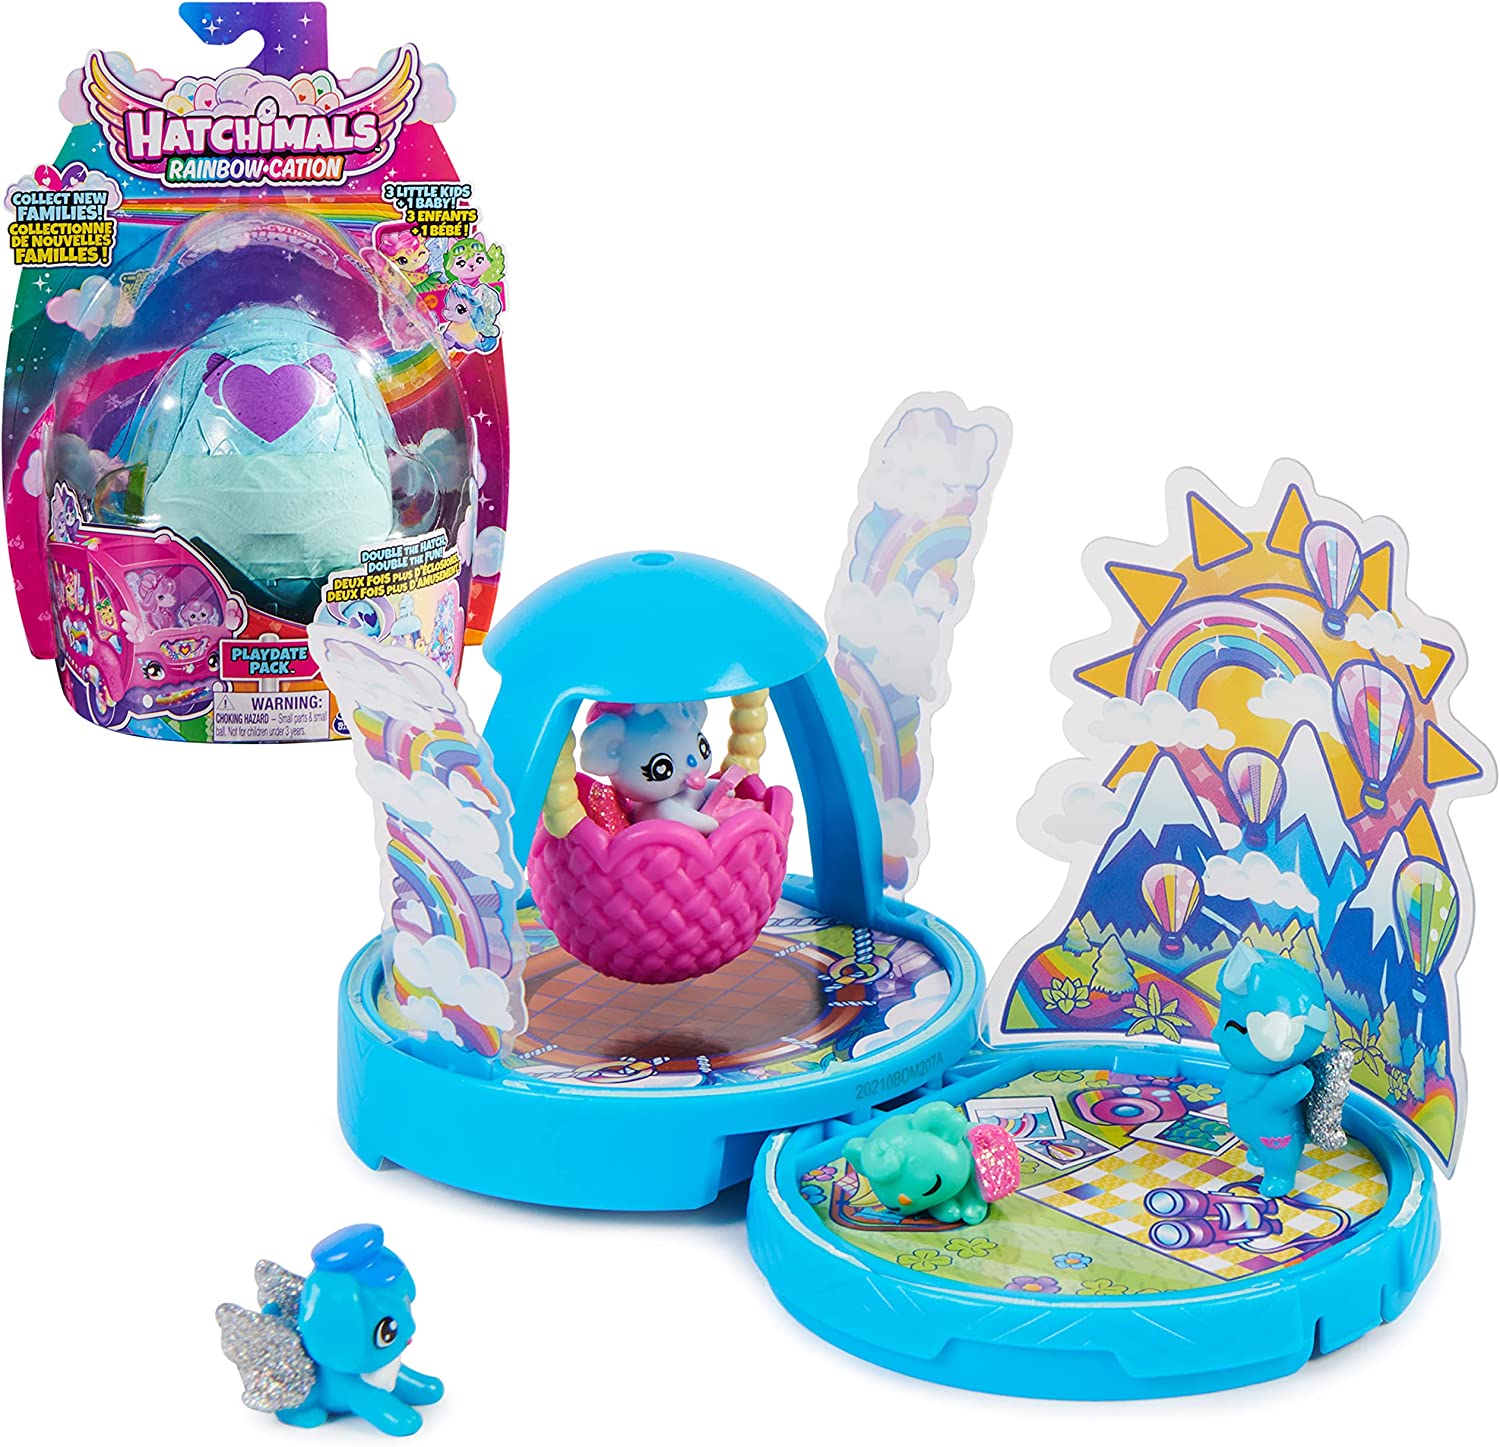 Hatchimals CollEGGtibles, Rainbow-Cation Playdate Pack Playset Toy, 4 Characters, 2 Accessories (Style May Vary)